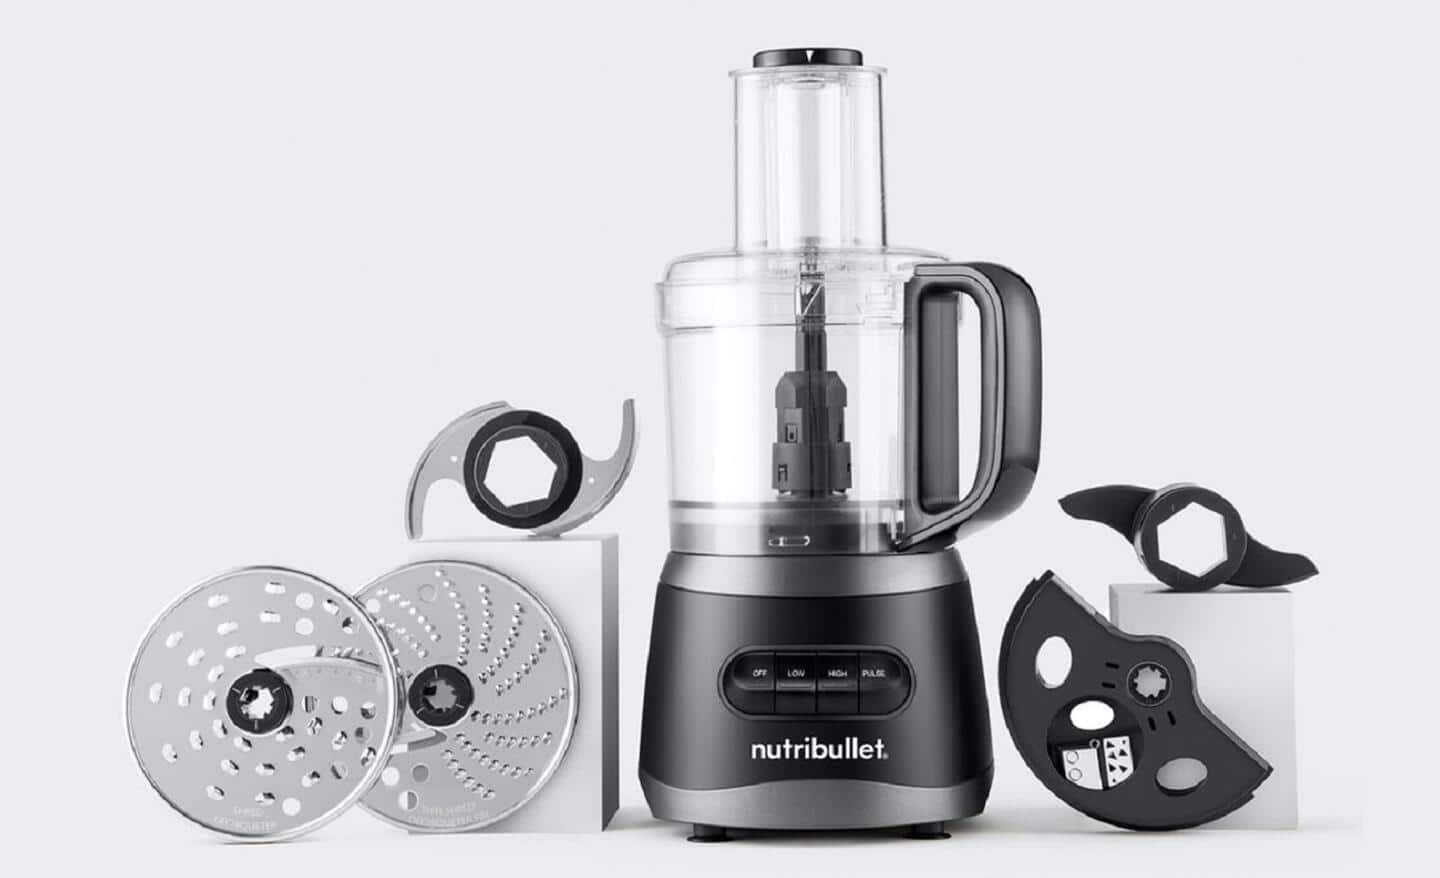 https://dam.thdstatic.com/content/production/E_w42gfI_MSrk3tIjd_Fow/vNZCN_eO_0Zplha7HZADMQ/Original%20file/buying-a-food-processor-vs-bender-for-your-kitchen-section-4.jpg